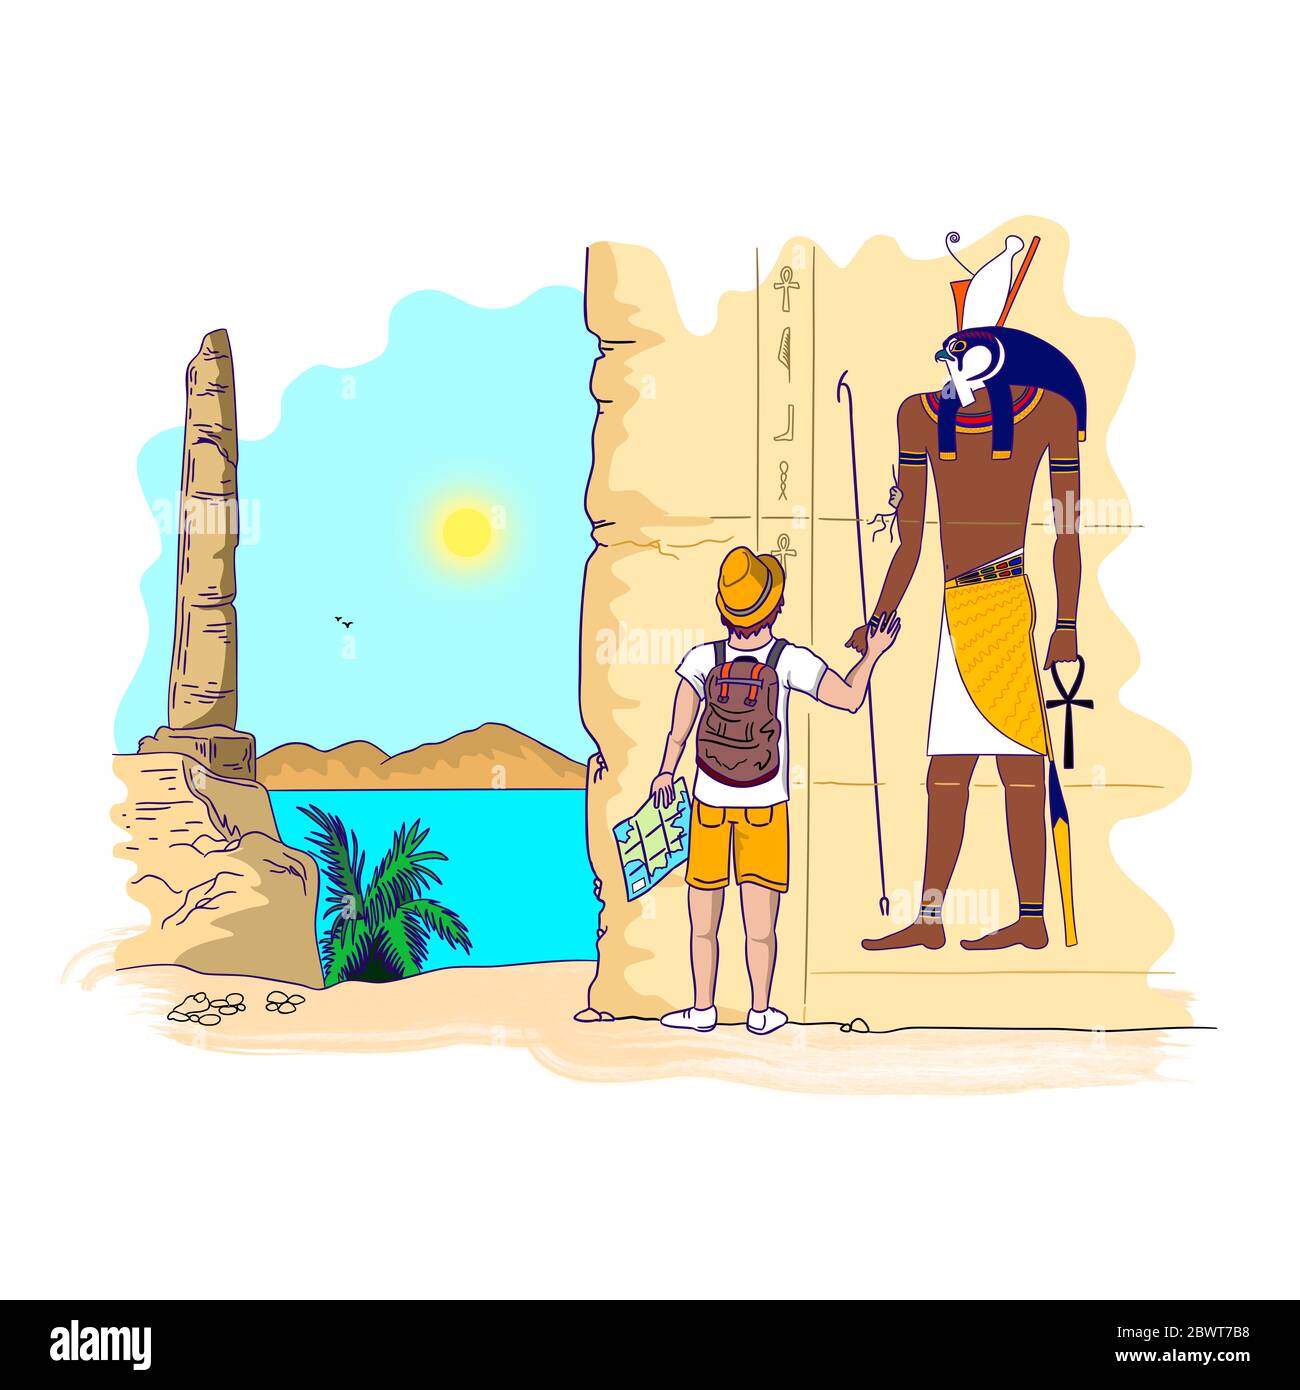 Tourist looking at ancient monument in Egypt Stock Photo